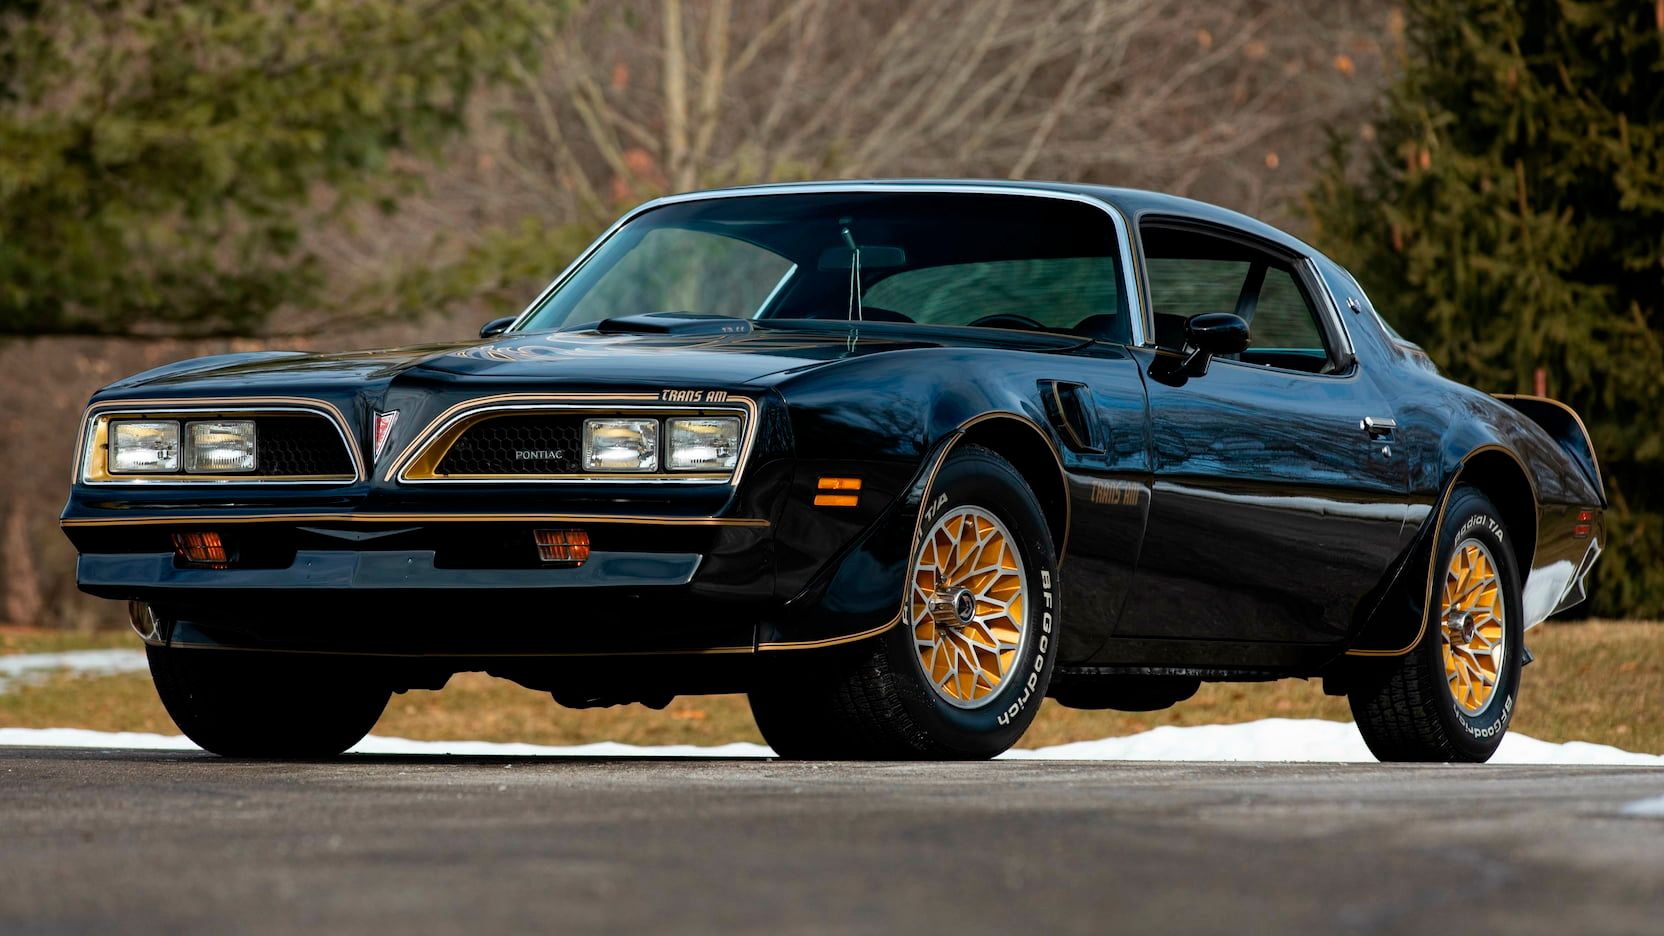 This Reimagined ’77 Pontiac Trans Am Is The Bandit Of Your Wildest Dreams